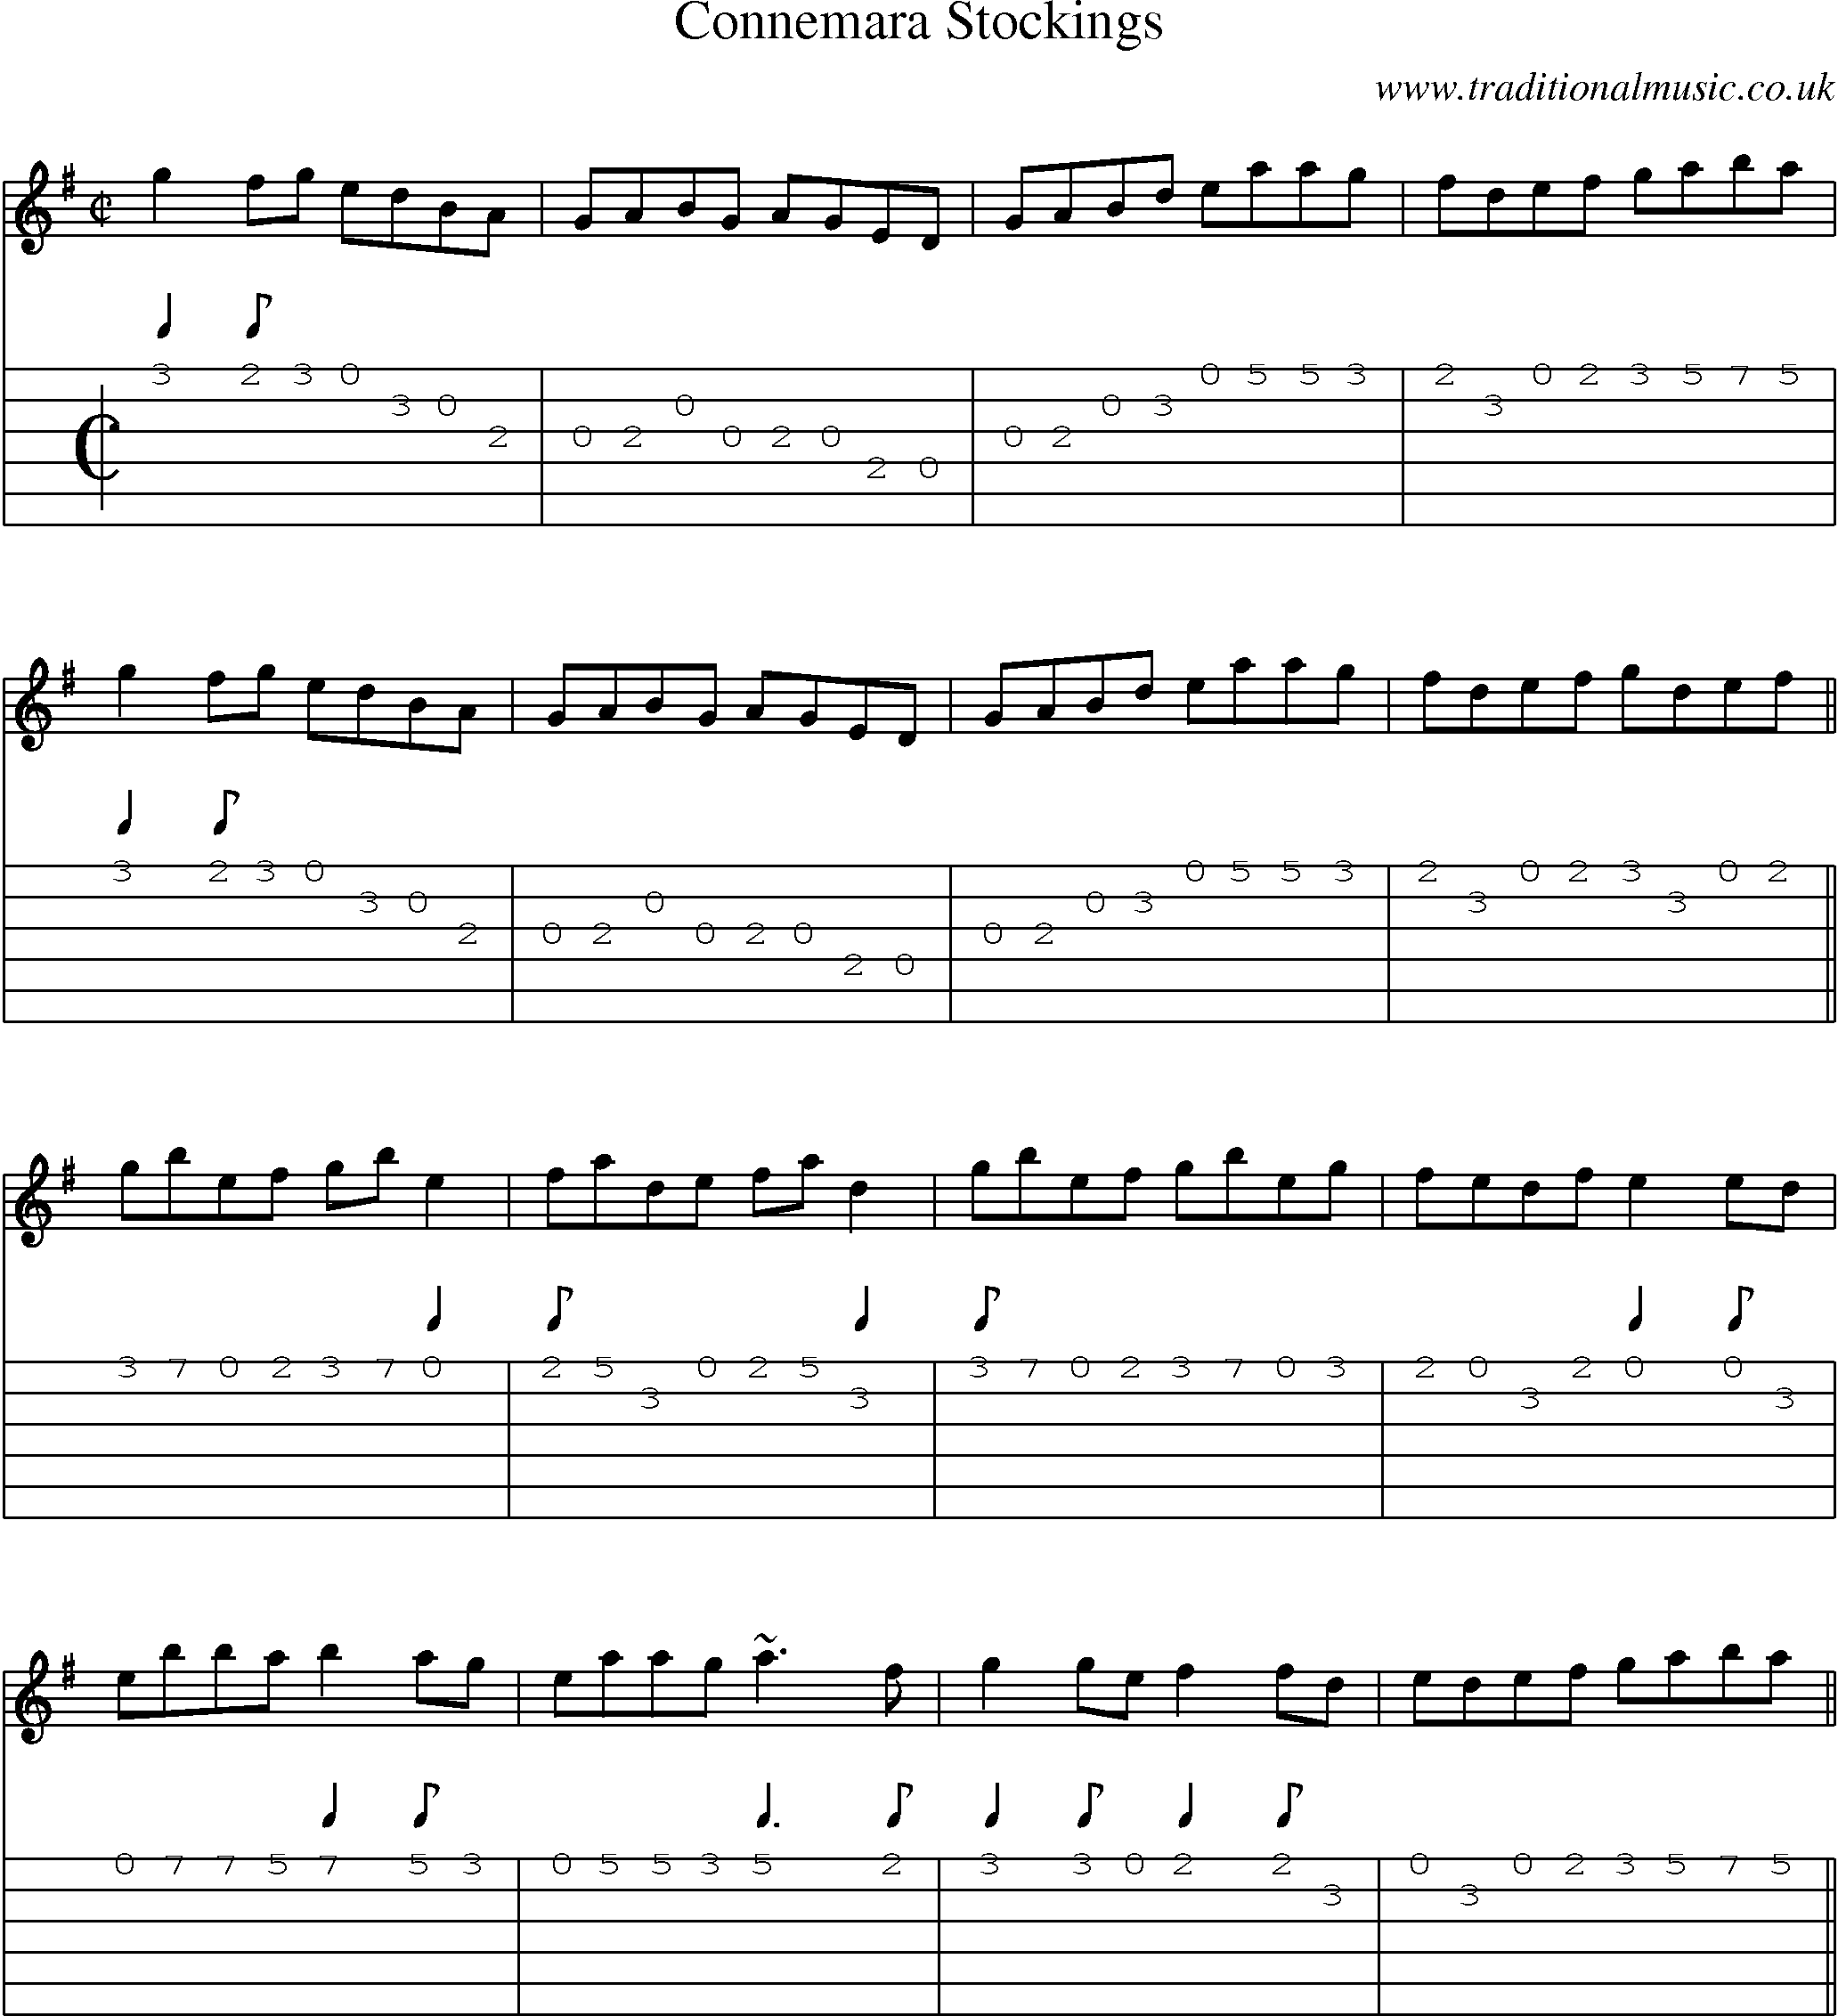 Music Score and Guitar Tabs for Connemara Stockings